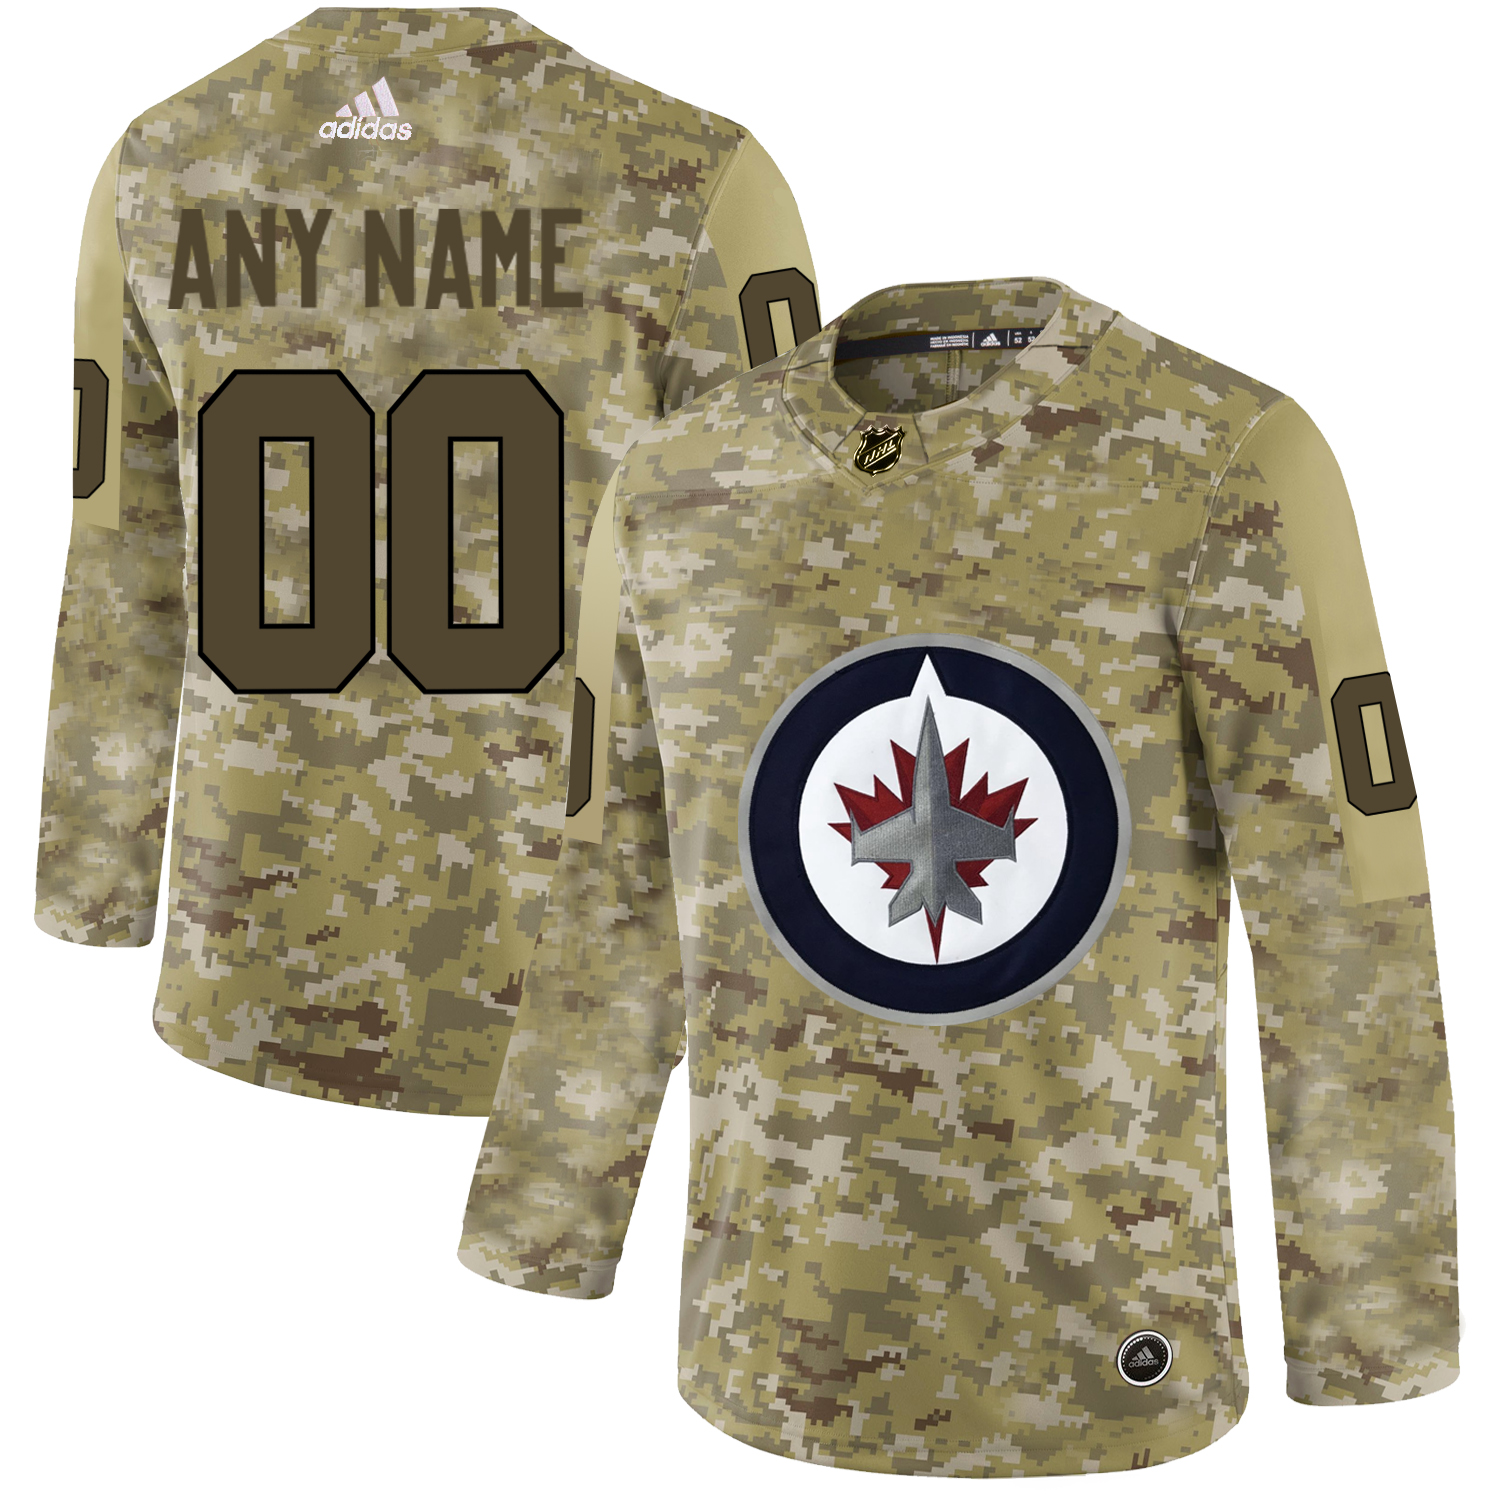 Men's Adidas Jets Personalized Camo Authentic NHL Jersey